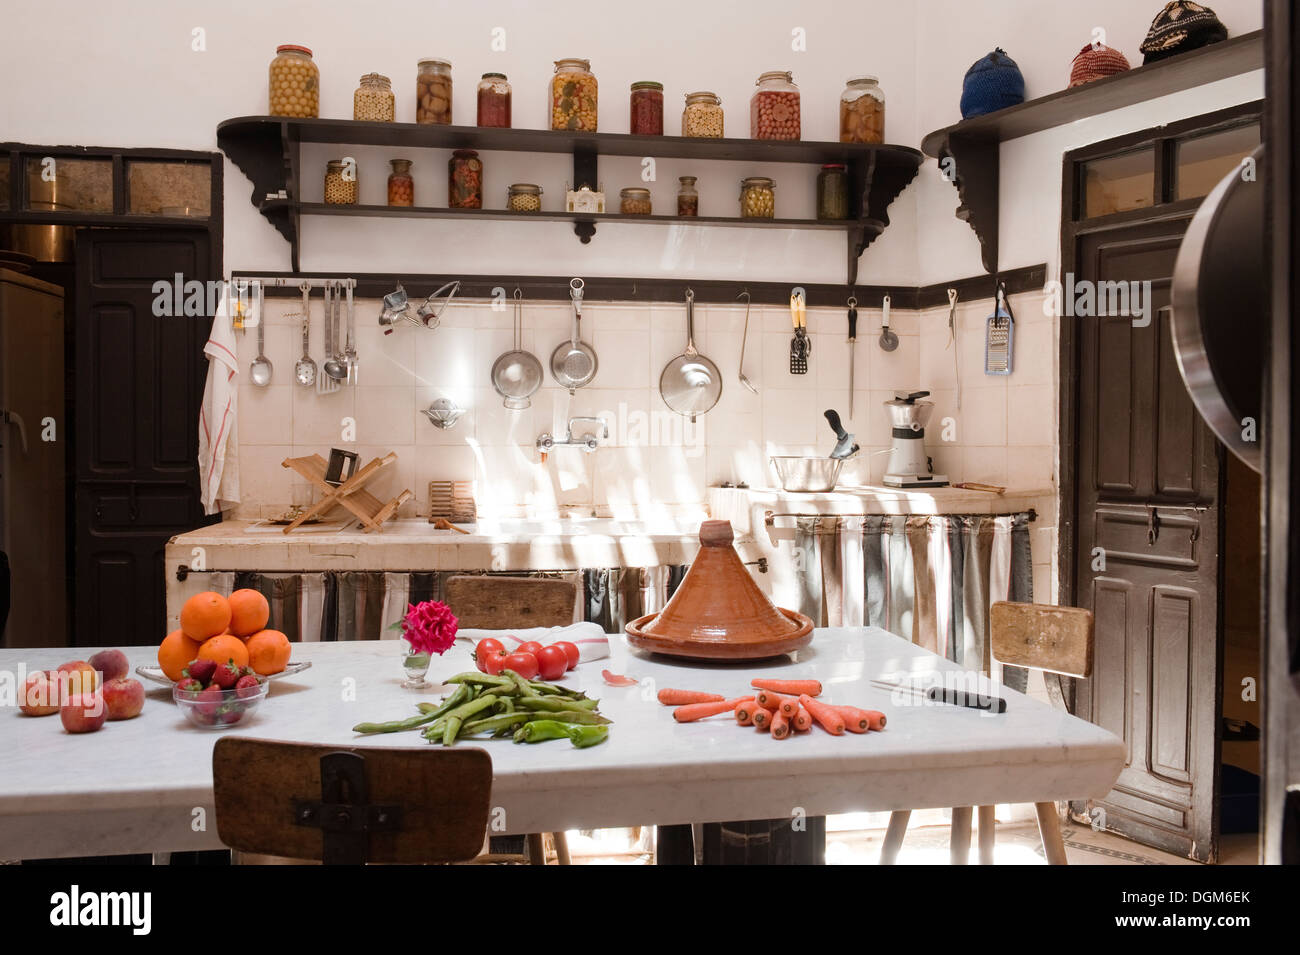 Moroccan kitchen with dark wood shelving Stock Photo